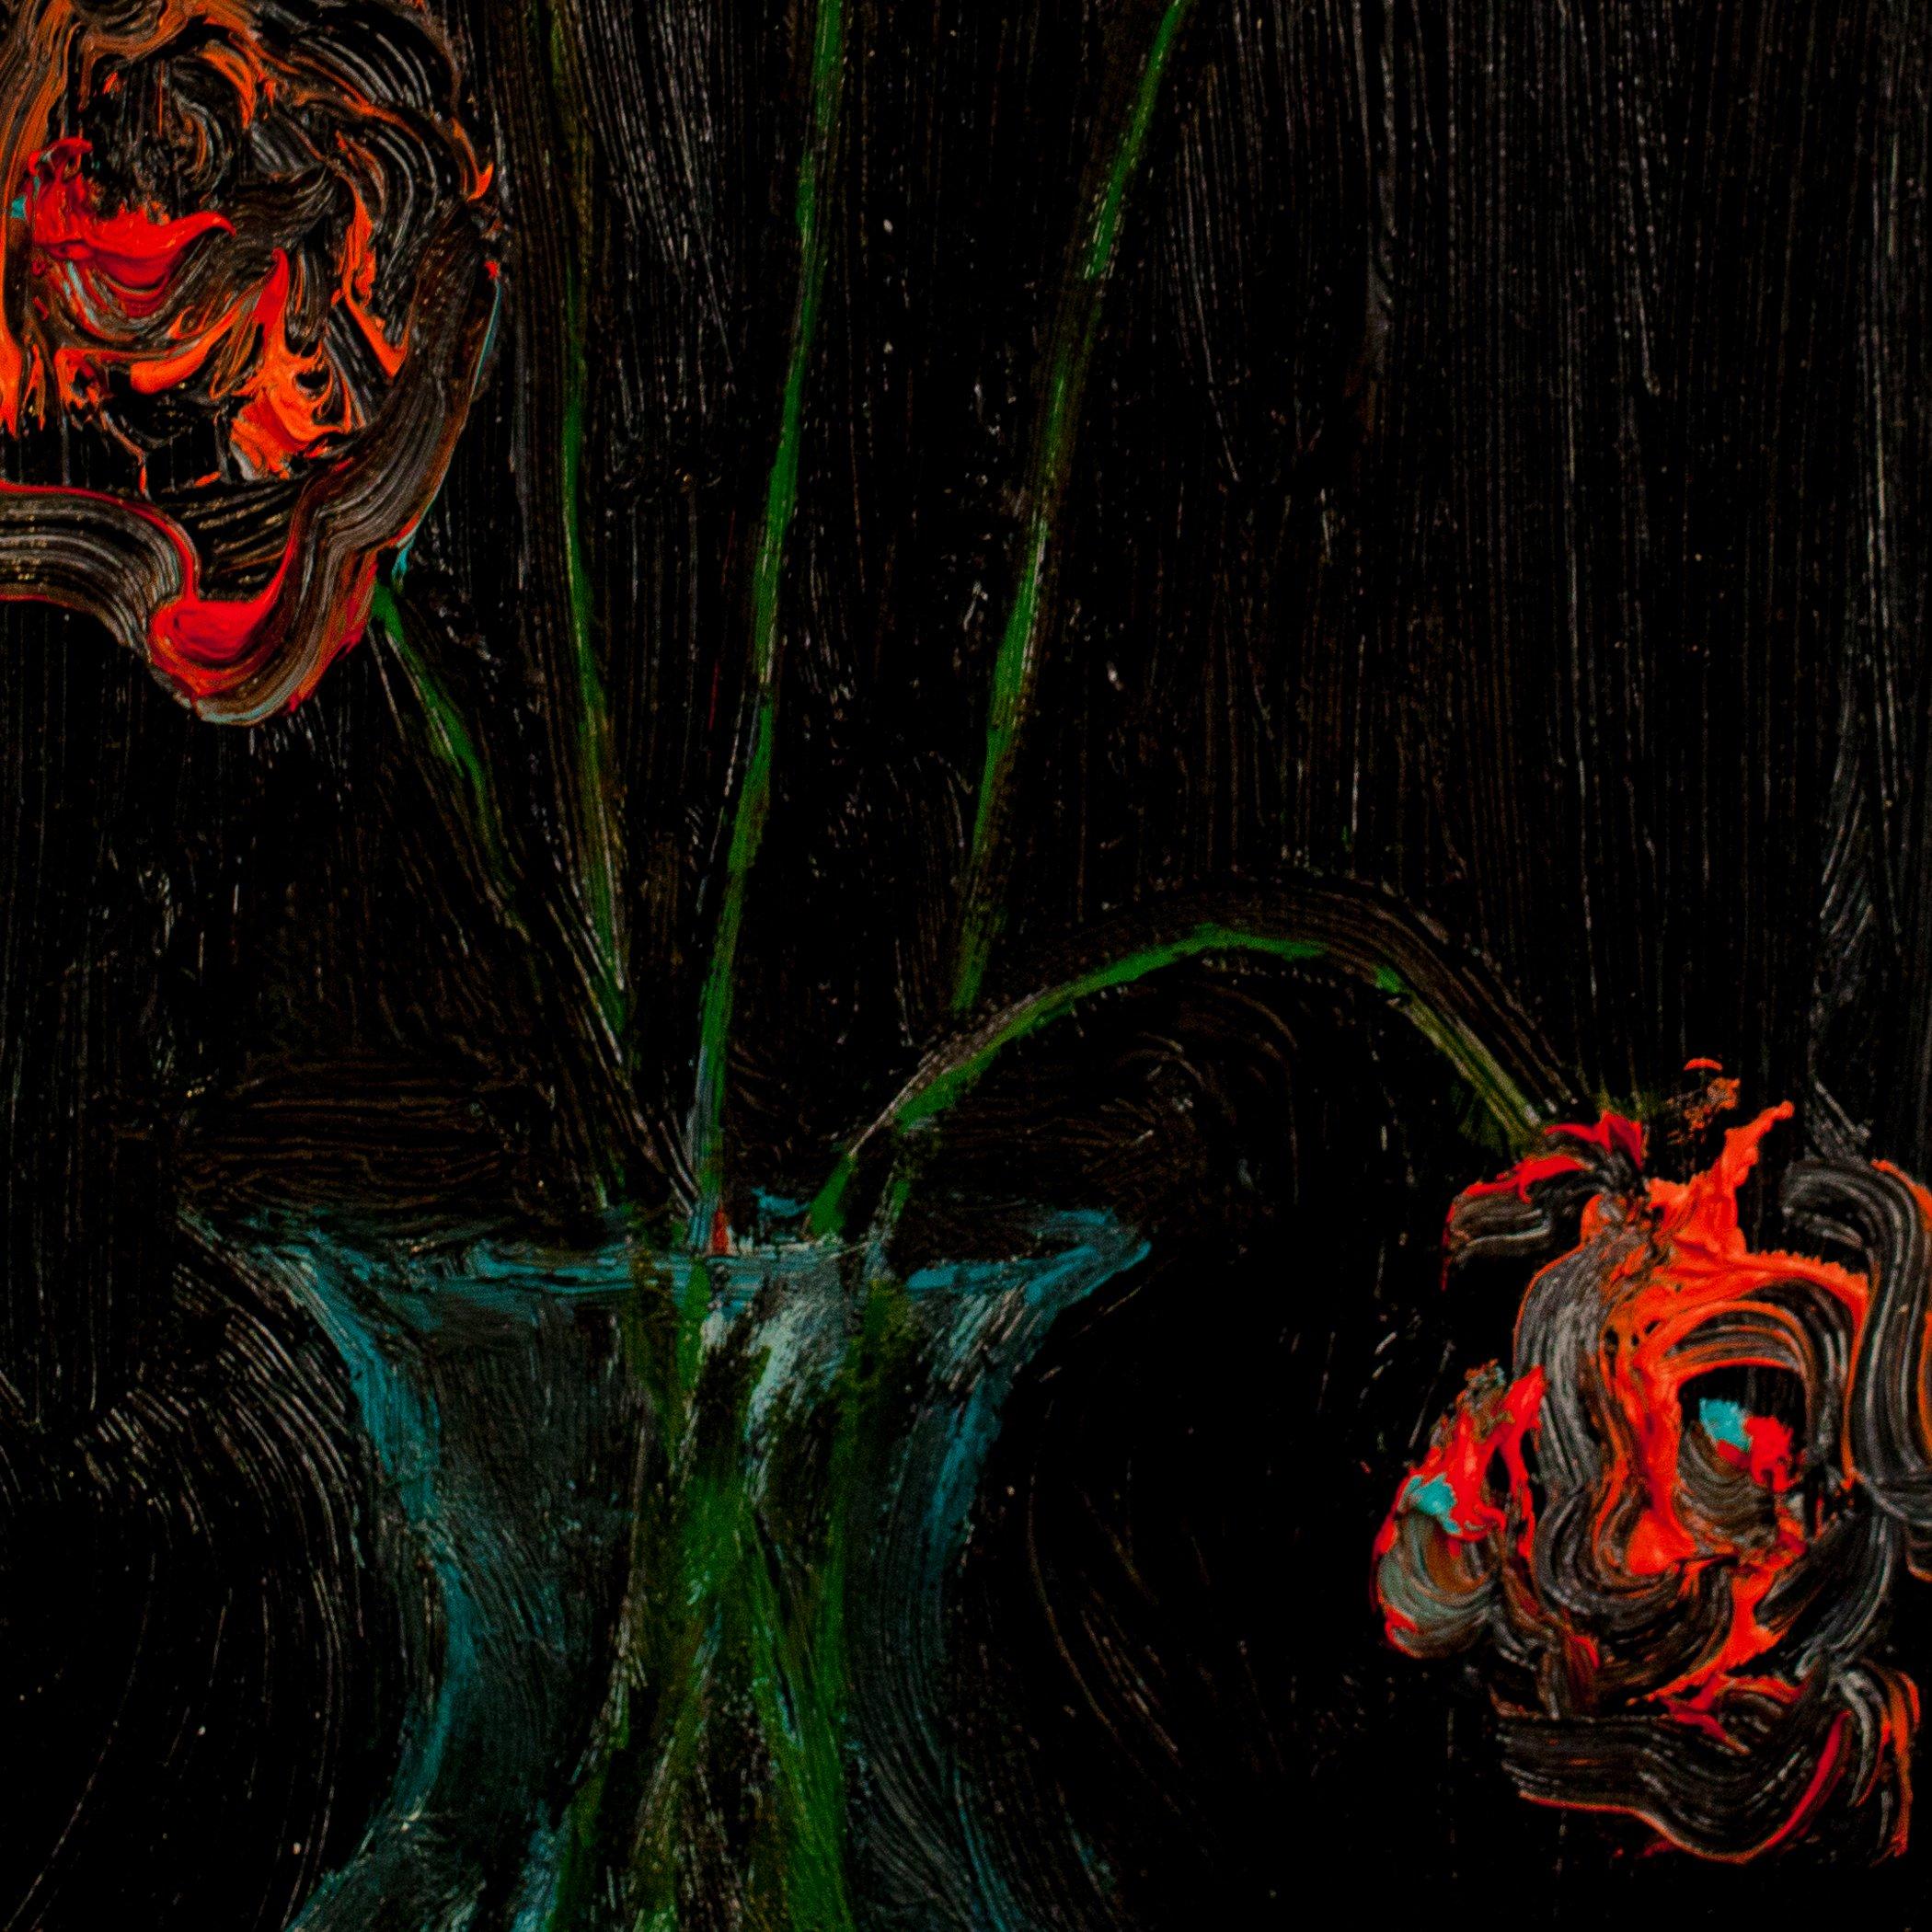 Red Roses In The Dark - Painting by Mariam Lomidze